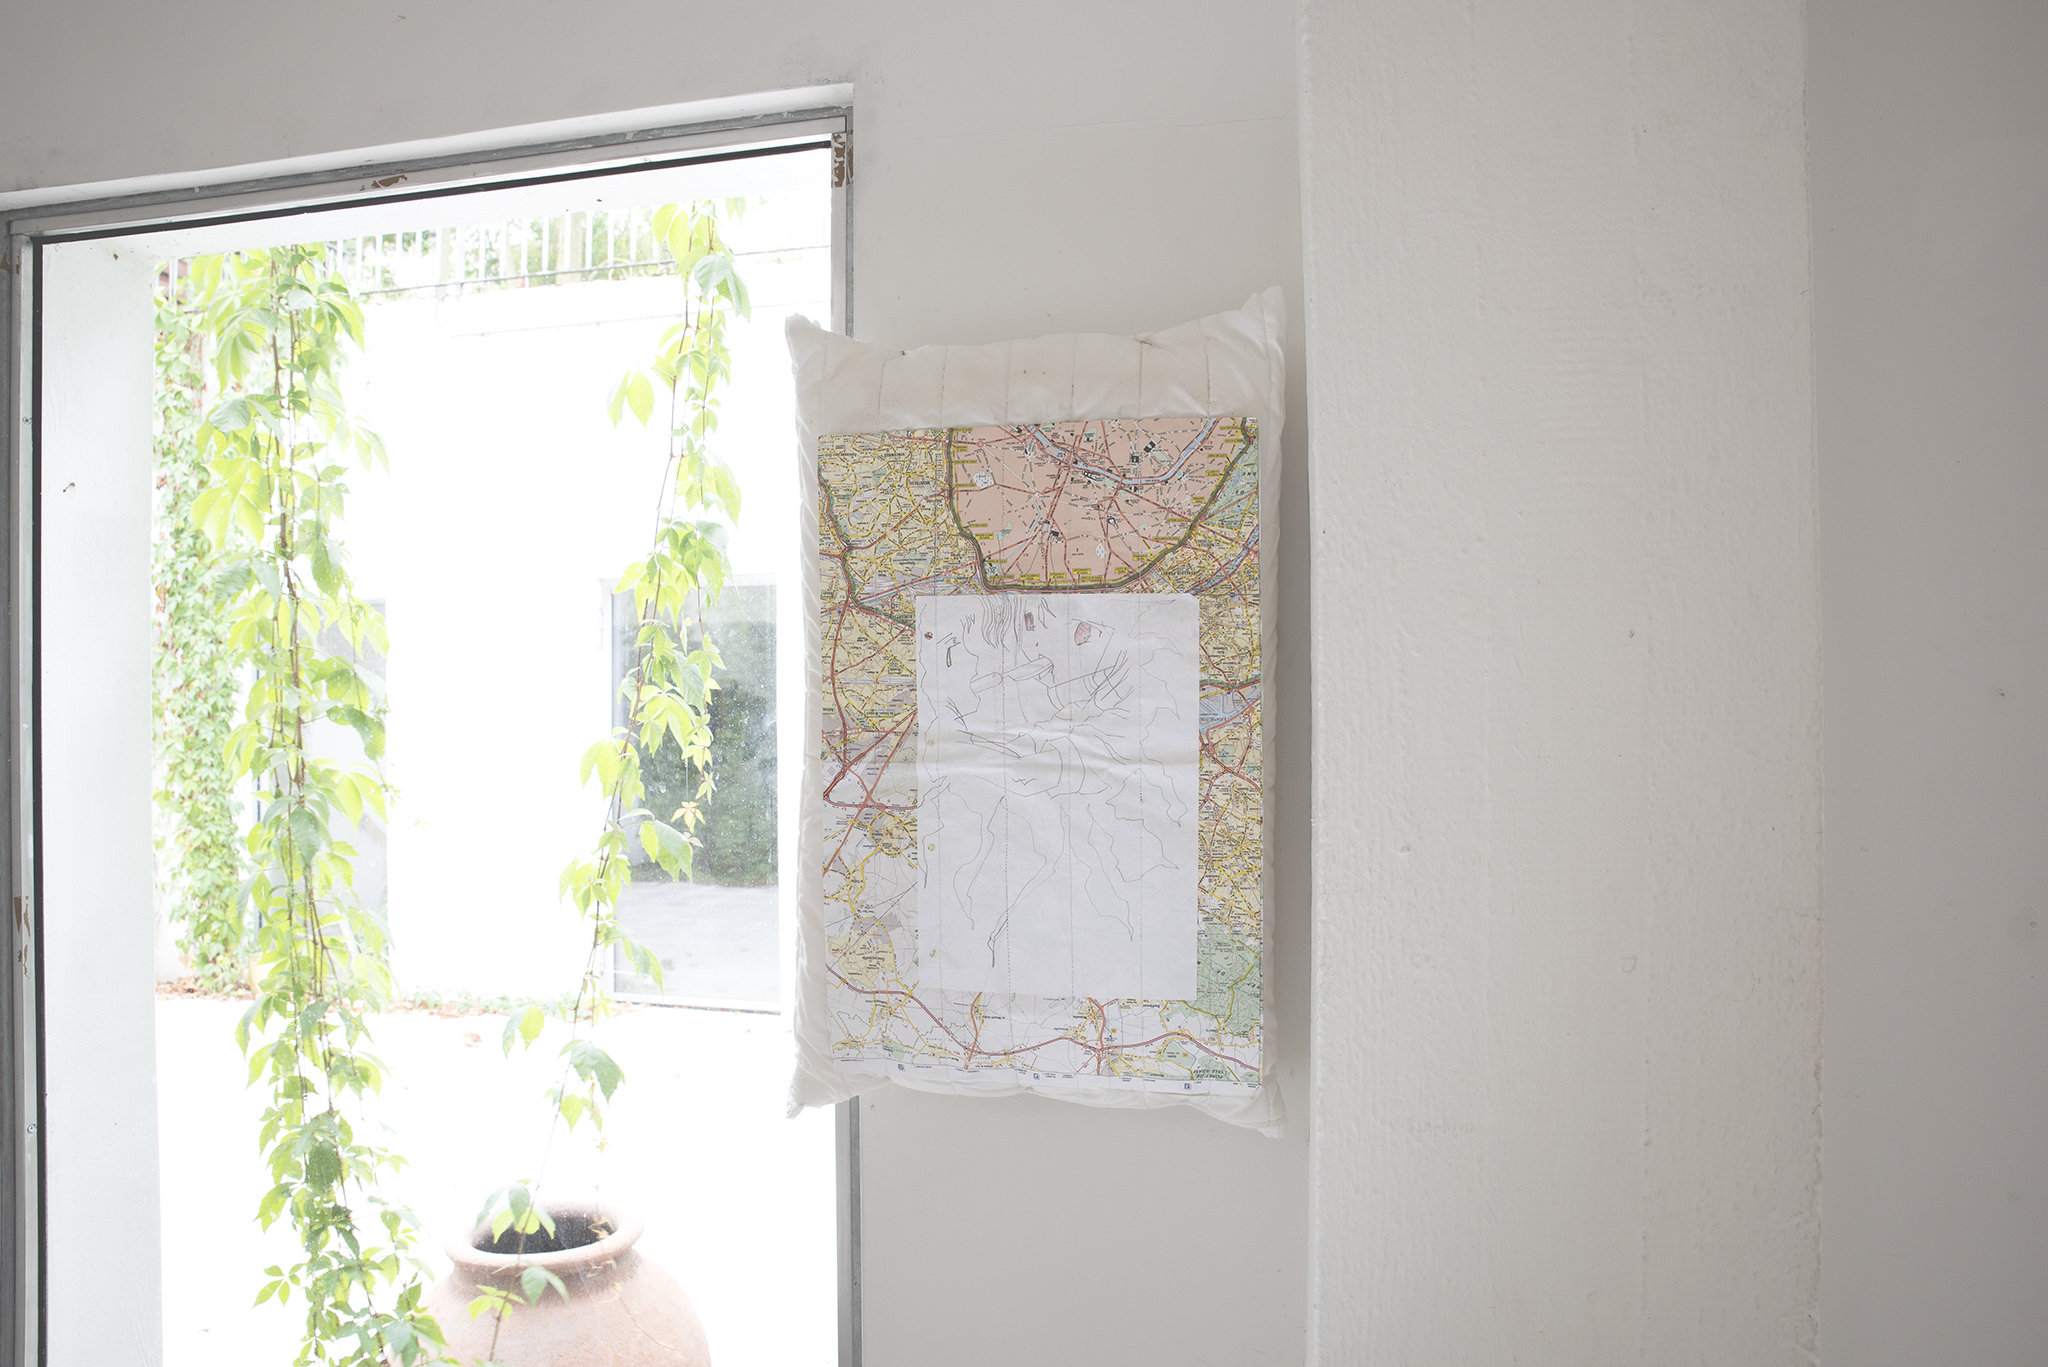 Jannis Besen, ShAmE (2022), Drawing sewn into city map of Paris sewn into pillow